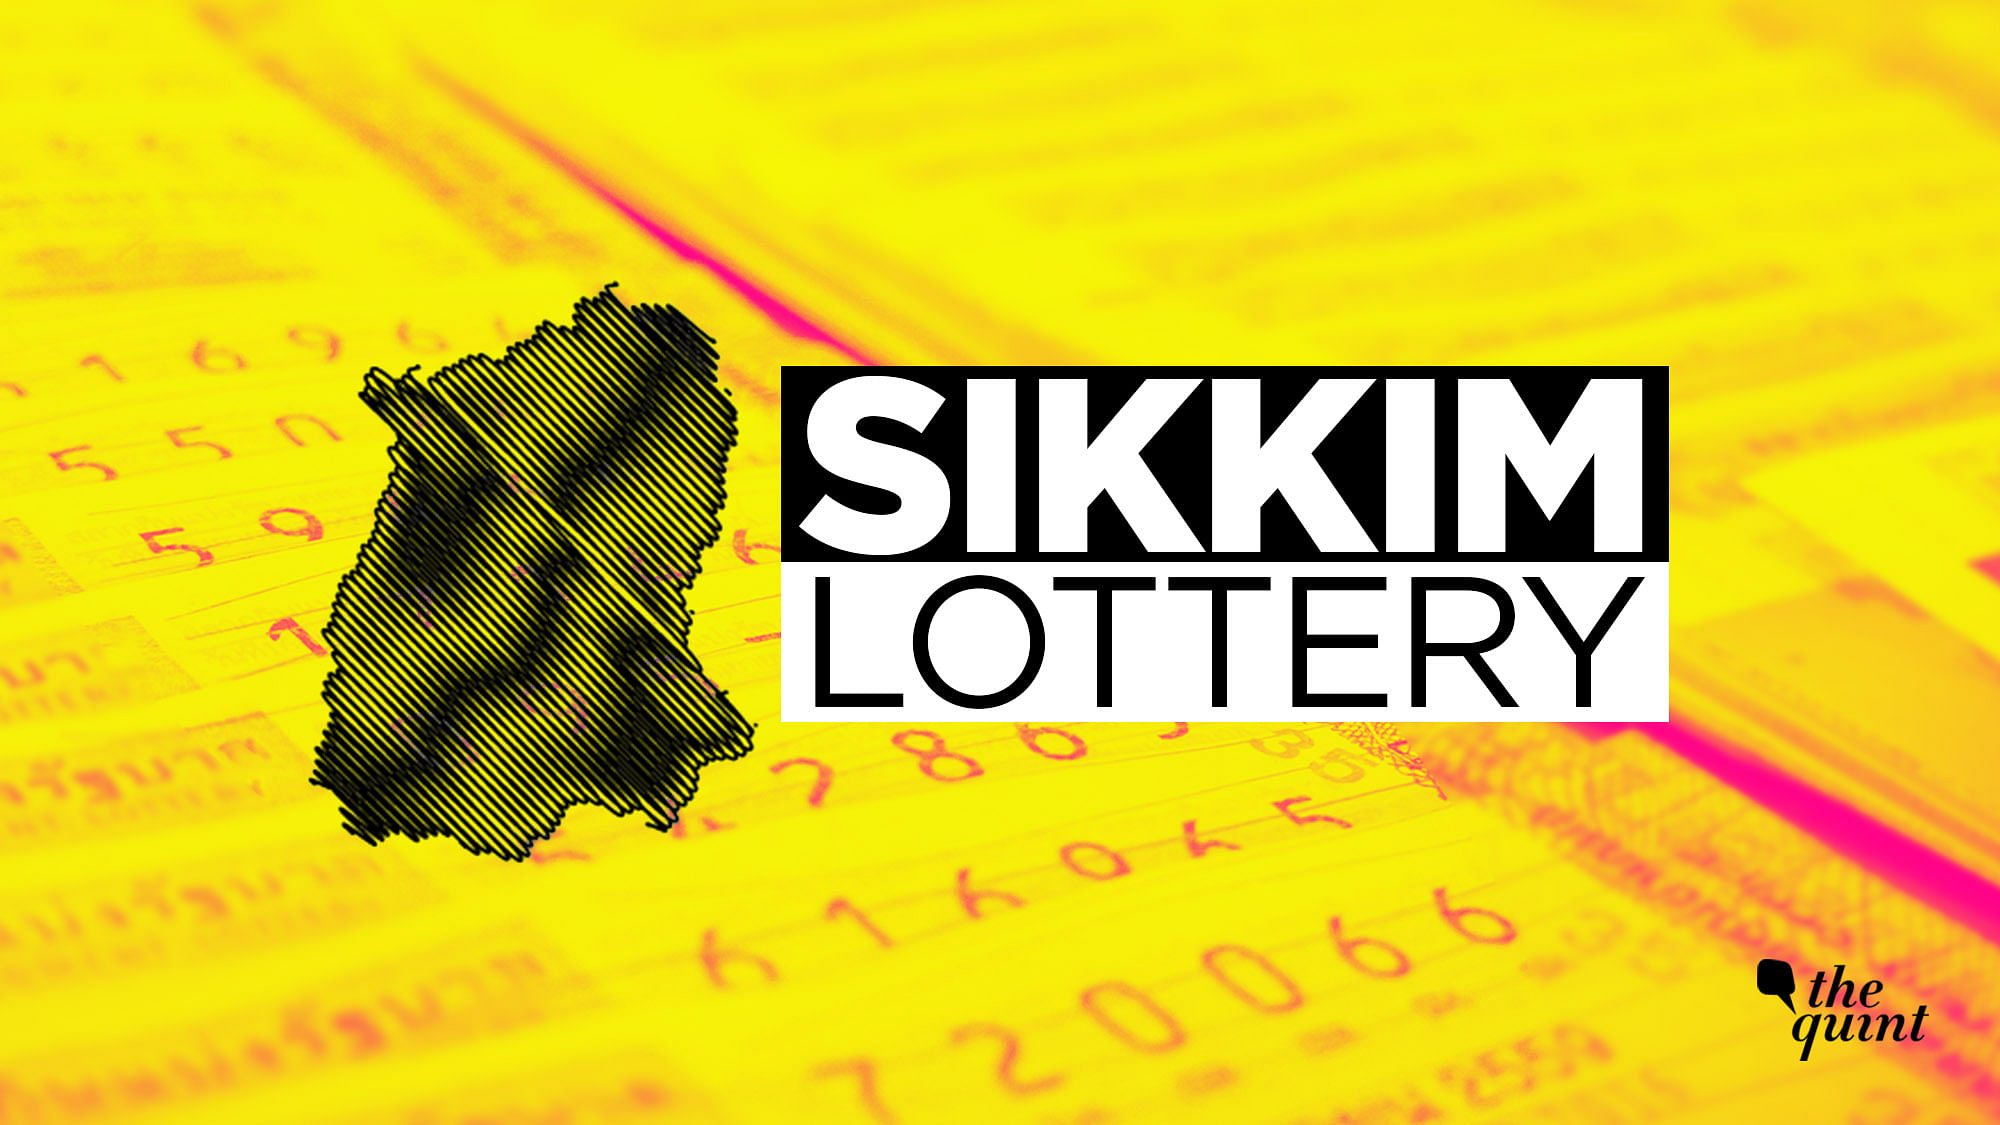 Today Lottery Sambad: The Sikkim lottery results have been declared at 11:55 am on 16 September 2019.